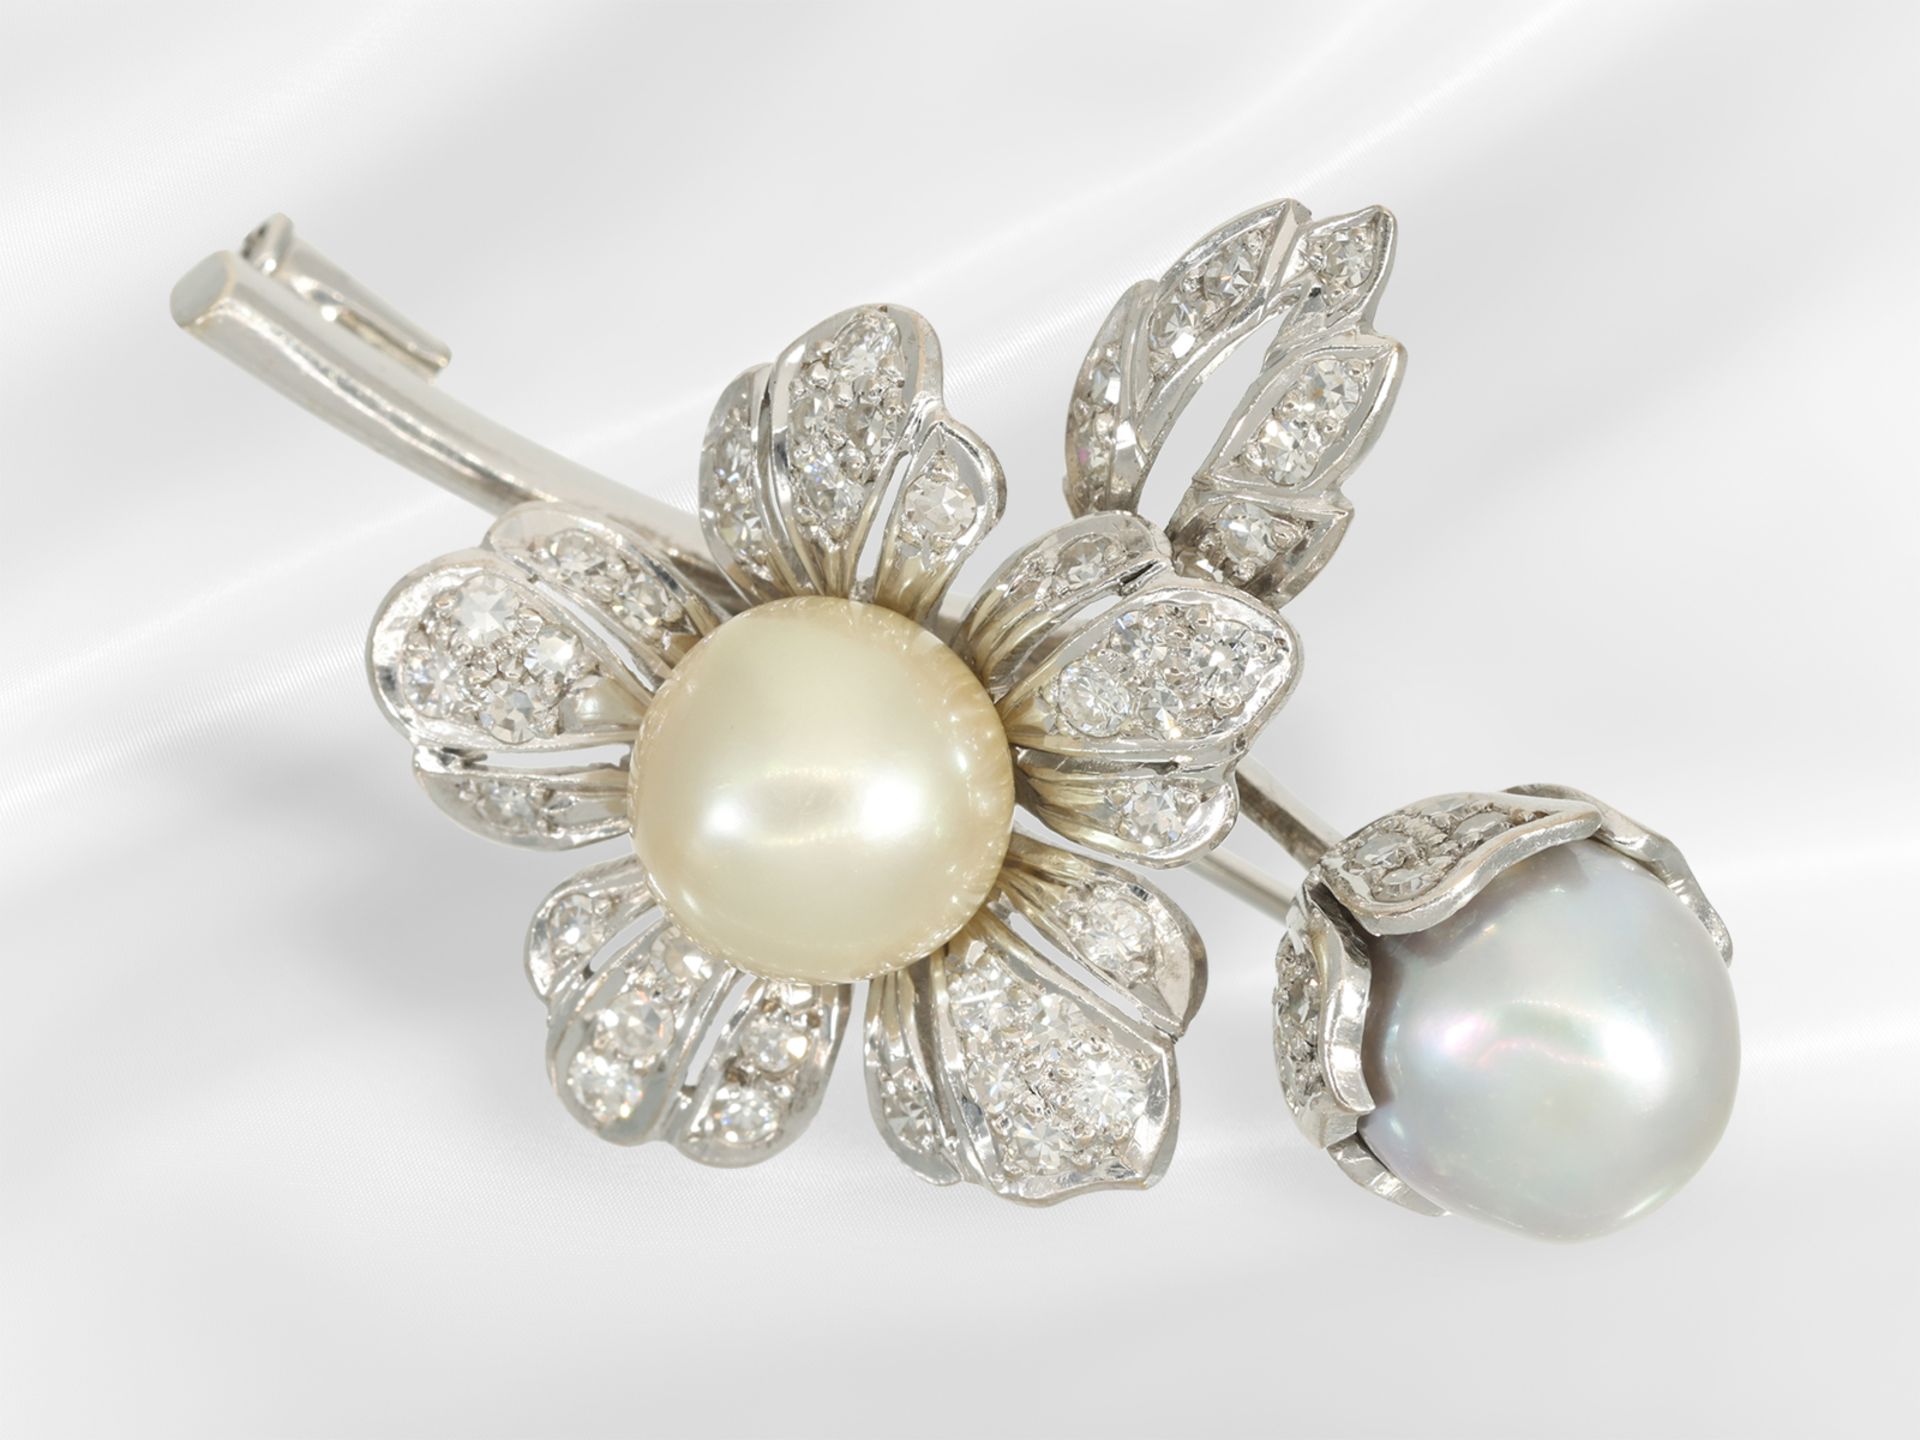 Brooch/pin: extremely decorative, floral vintage gold jewellery with pearls and brilliant-cut diamon - Image 3 of 3